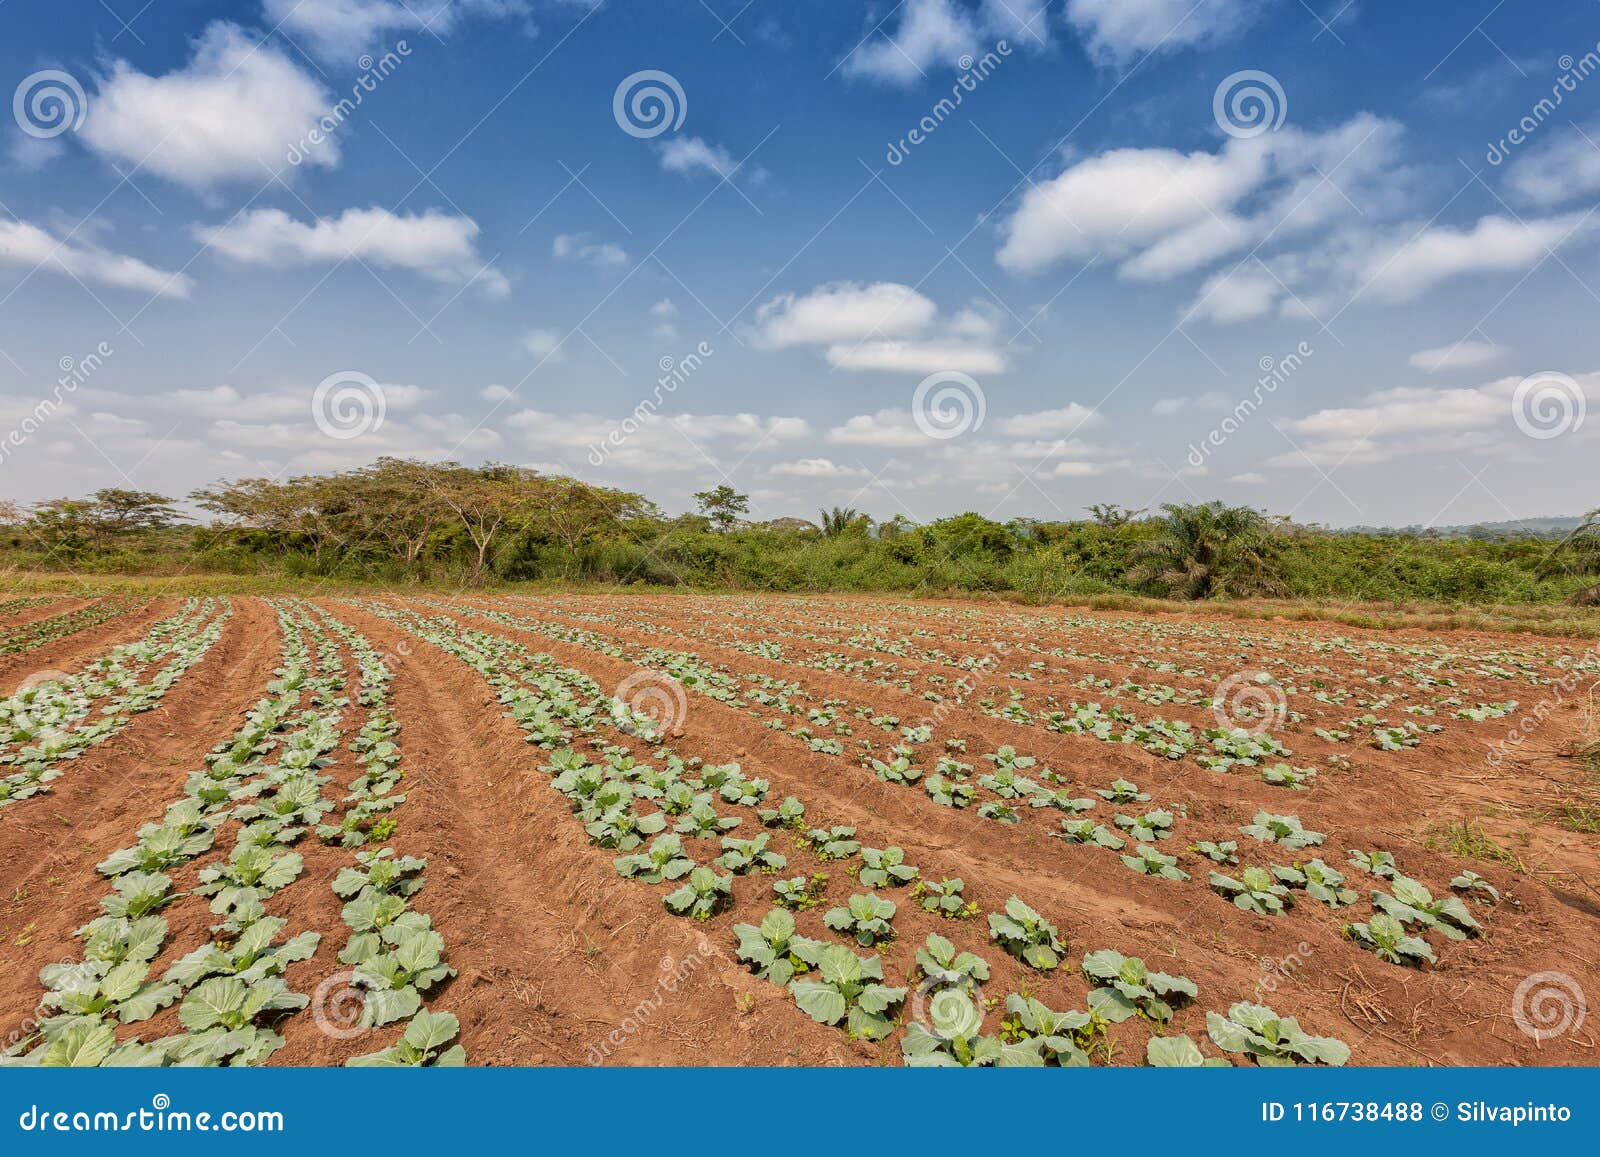 rural plantation in the middle of the cabinda jungle. angola, africa.